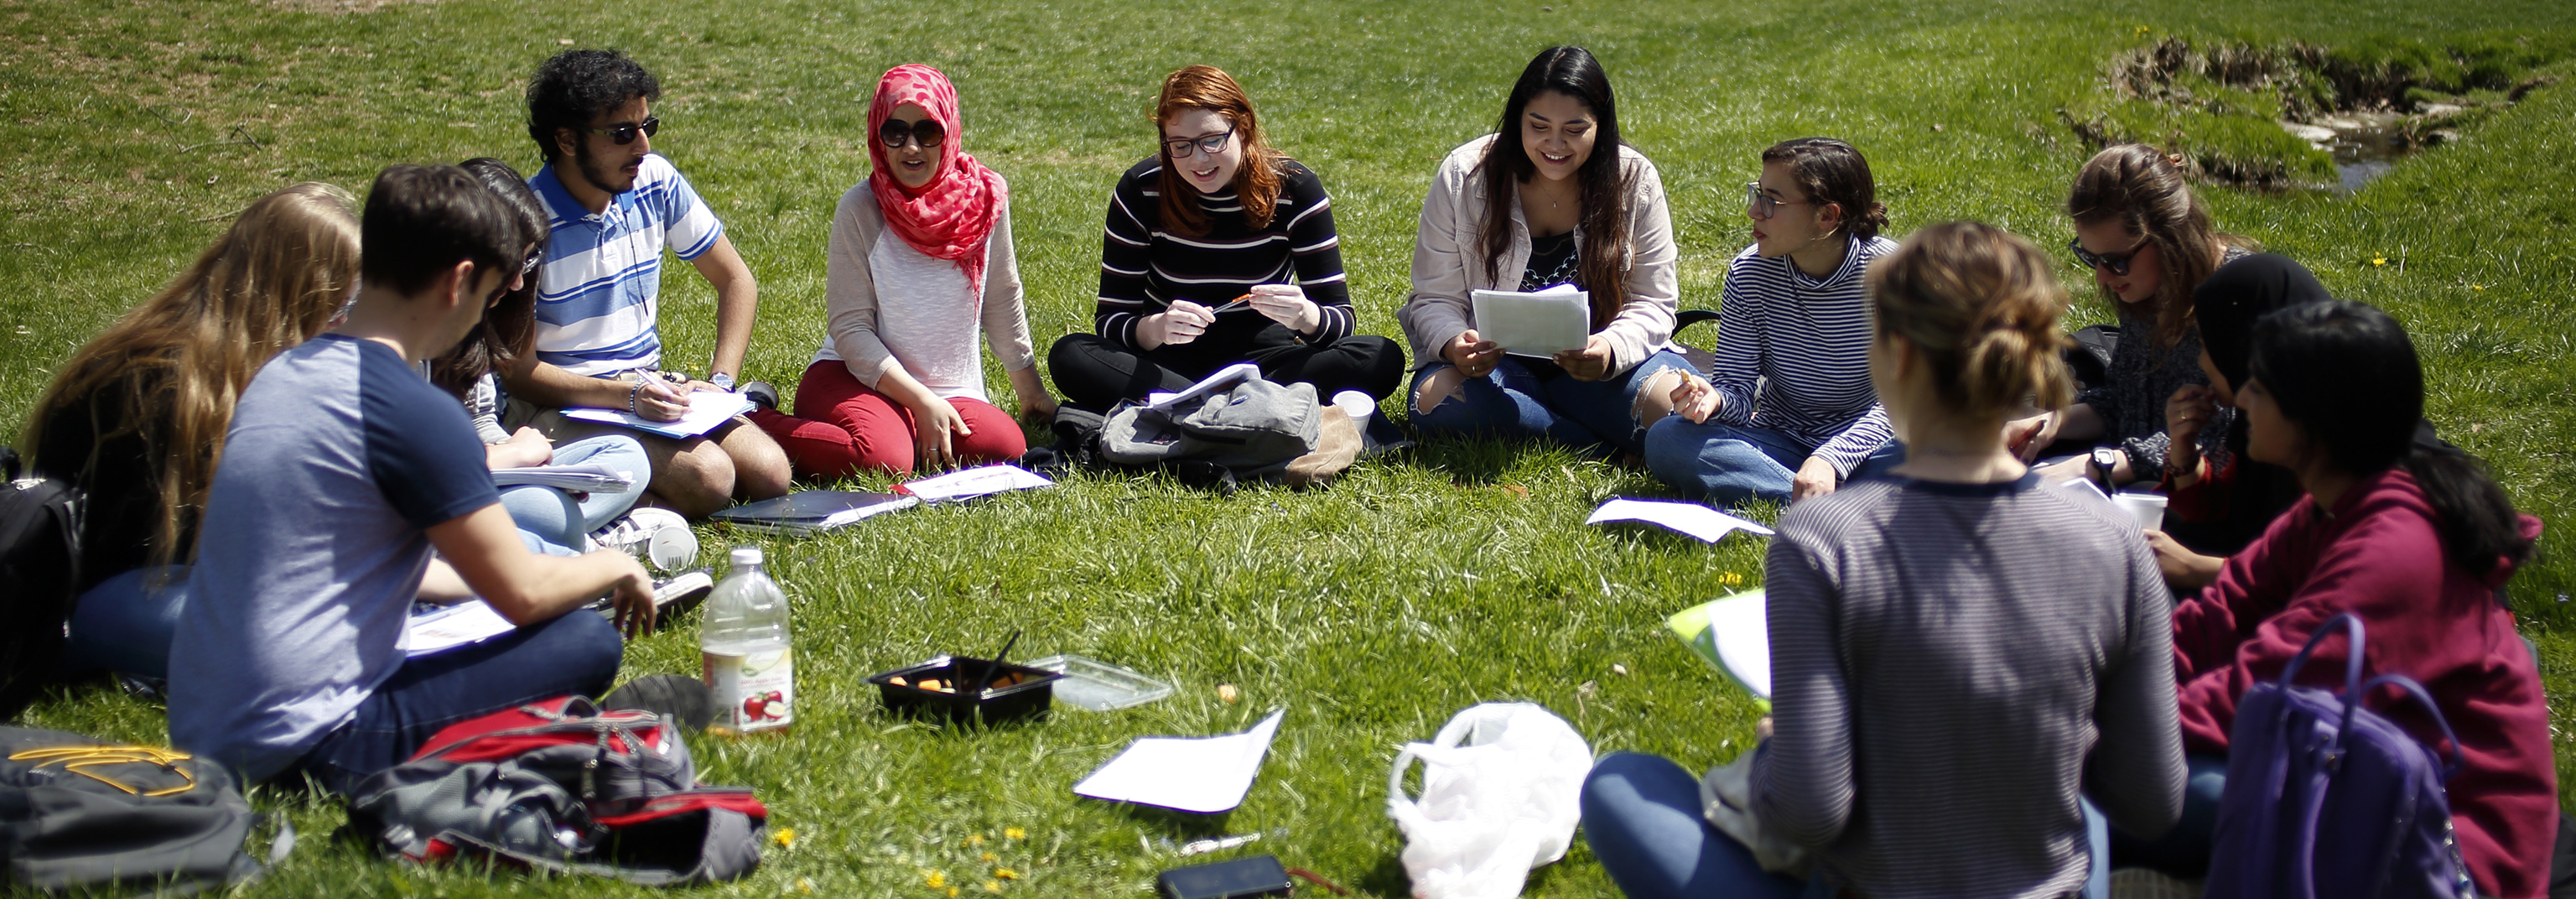 Students participate in an Arabic class, seated in front of Bryan House, taken on Wednesday, April 18, 2018.